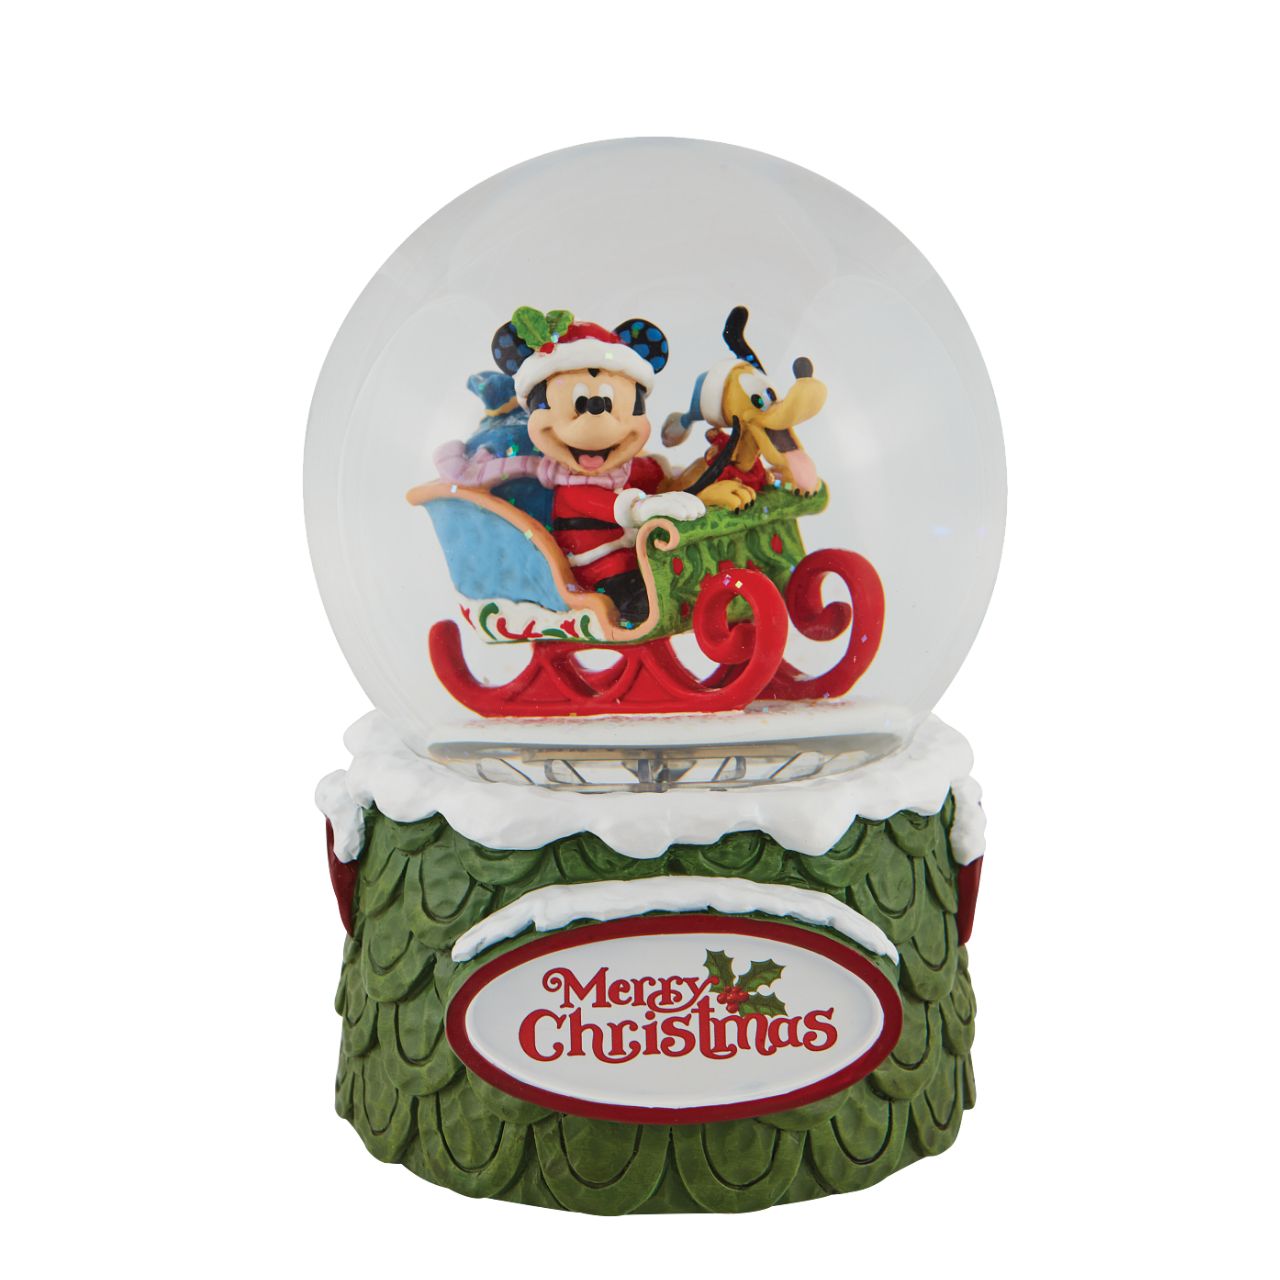 Disney Mickey and Pluto Christmas Waterball  "Laughing All the Way" Make it snow all season long with this exquisitely crafted Disney snow globe by Jim Shore. Mickey plays Santa with his trusty steed, Pluto, riding shotgun.